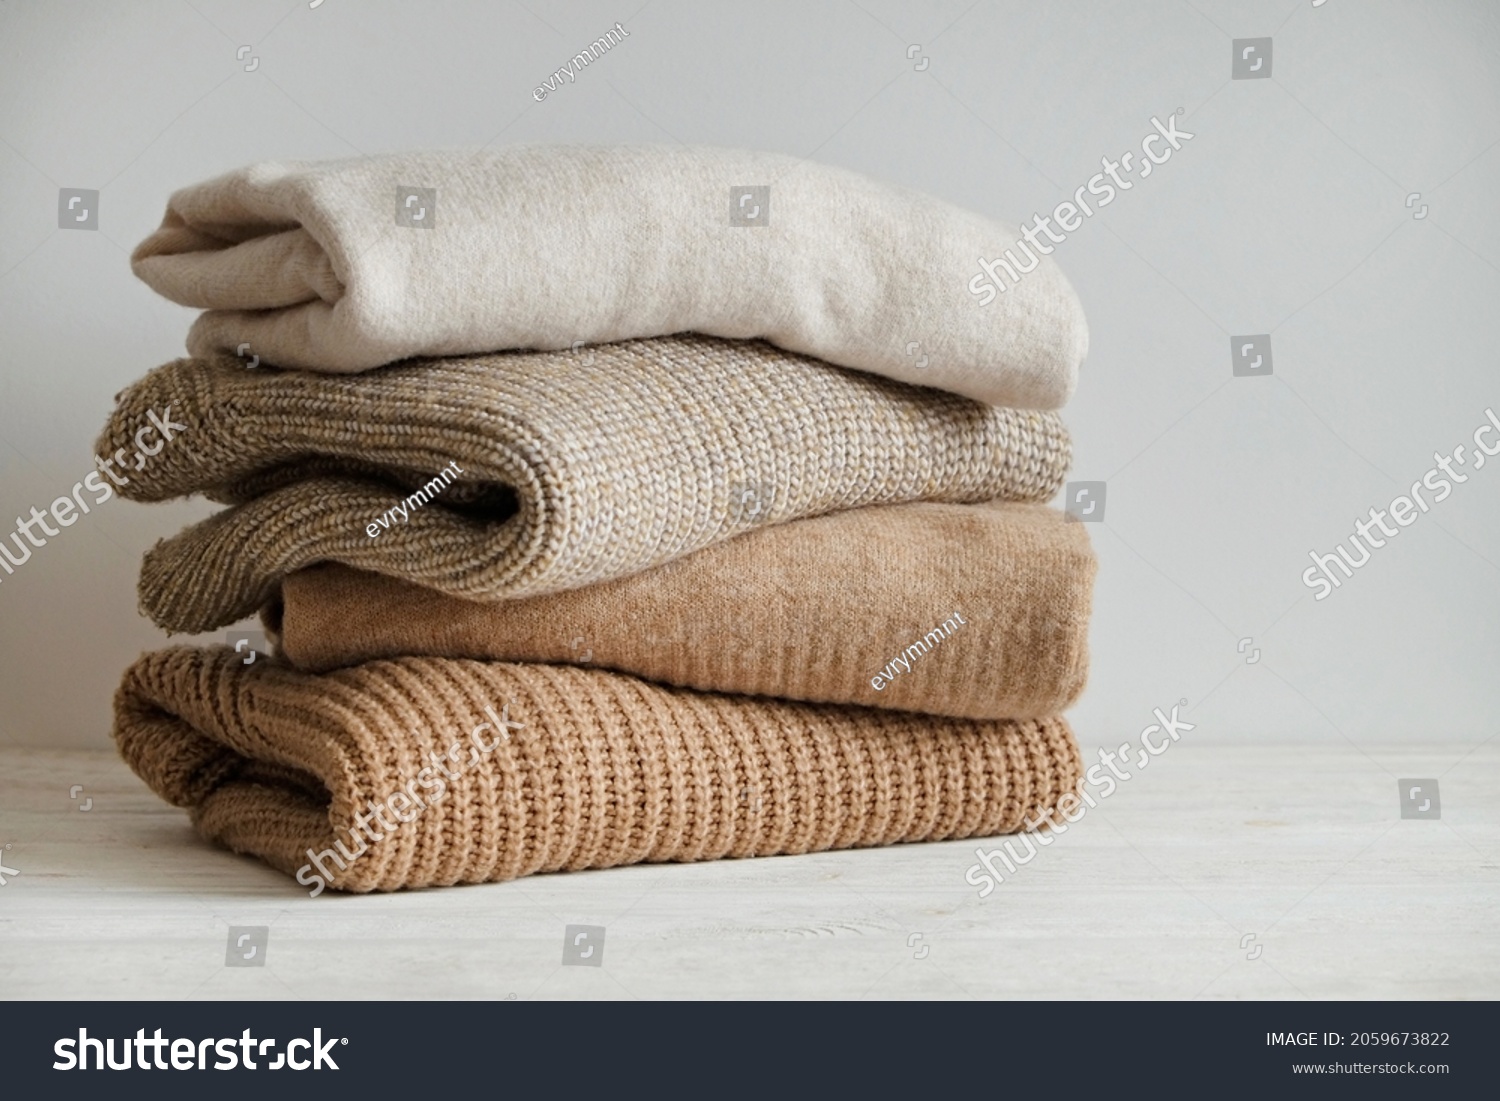 Bunch of knitted warm pastel color sweaters with different knitting patterns stacked in messy pile on white wooden table, white wall background. Fall winter season knitwear. Close up, copy space. #2059673822